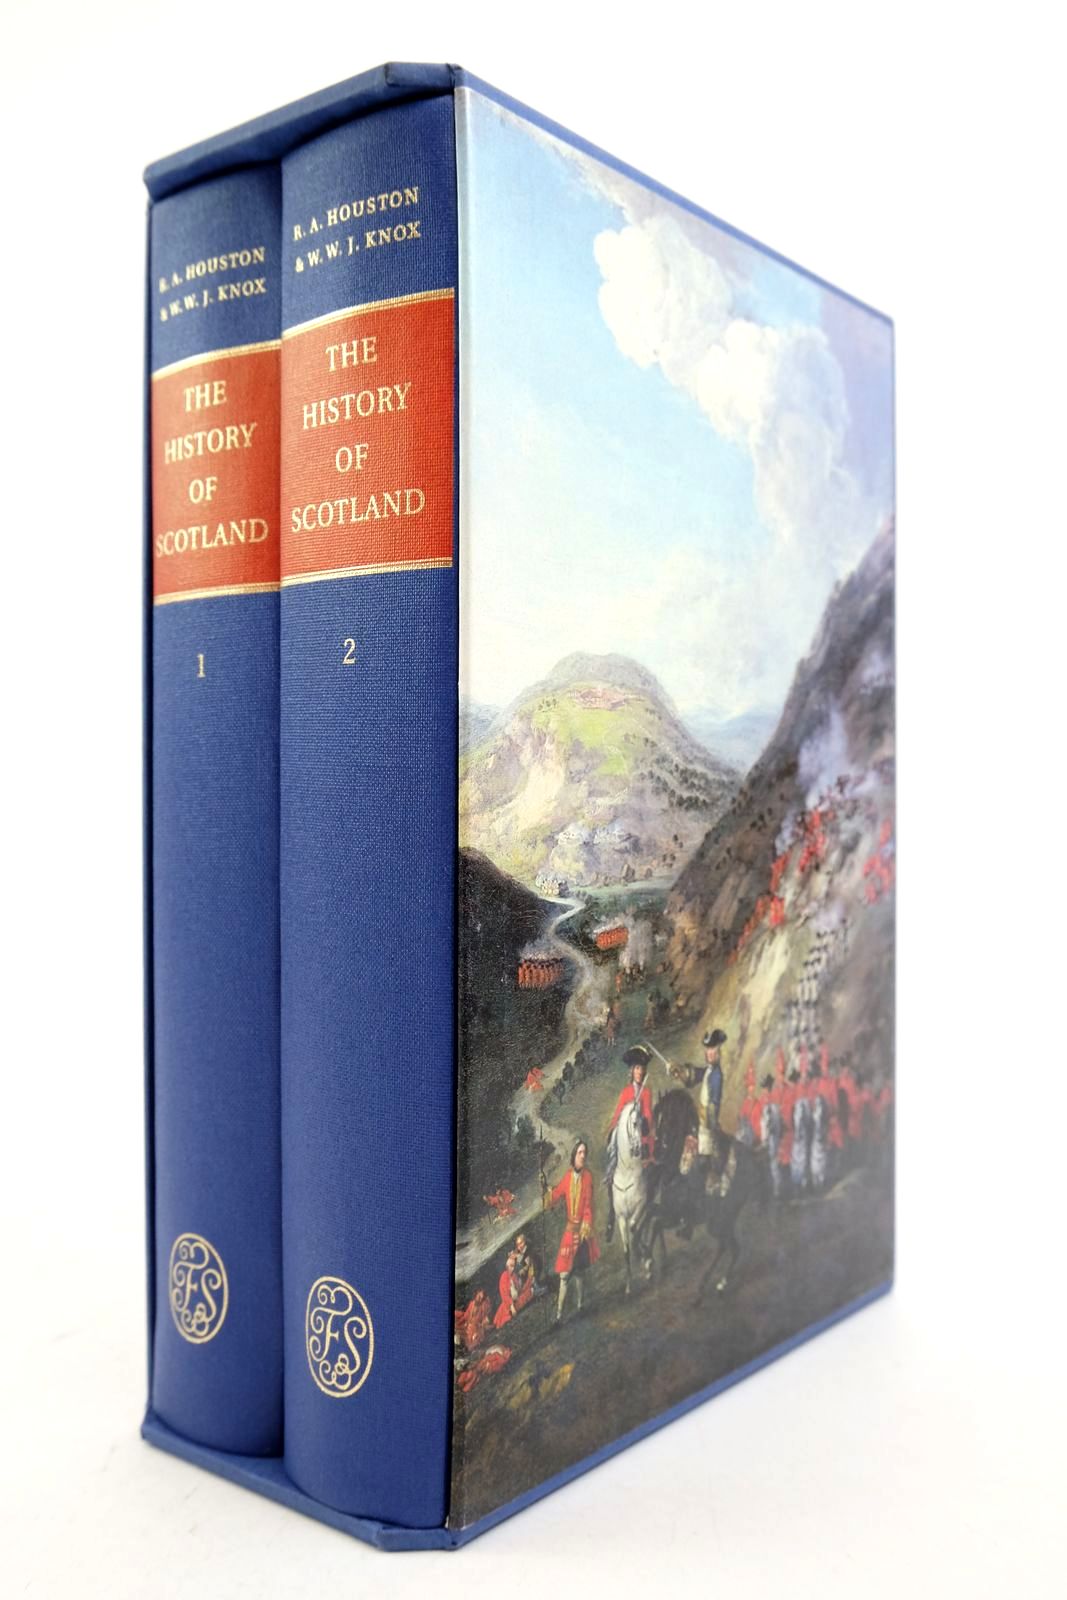 Photo of THE HISTORY OF SCOTLAND FROM THE EARLIEST TIMES TO THE PRESENT DAY (2 VOLUMES) written by Houston, R.A. Knox, W.W.J. published by Folio Society (STOCK CODE: 2139452)  for sale by Stella & Rose's Books